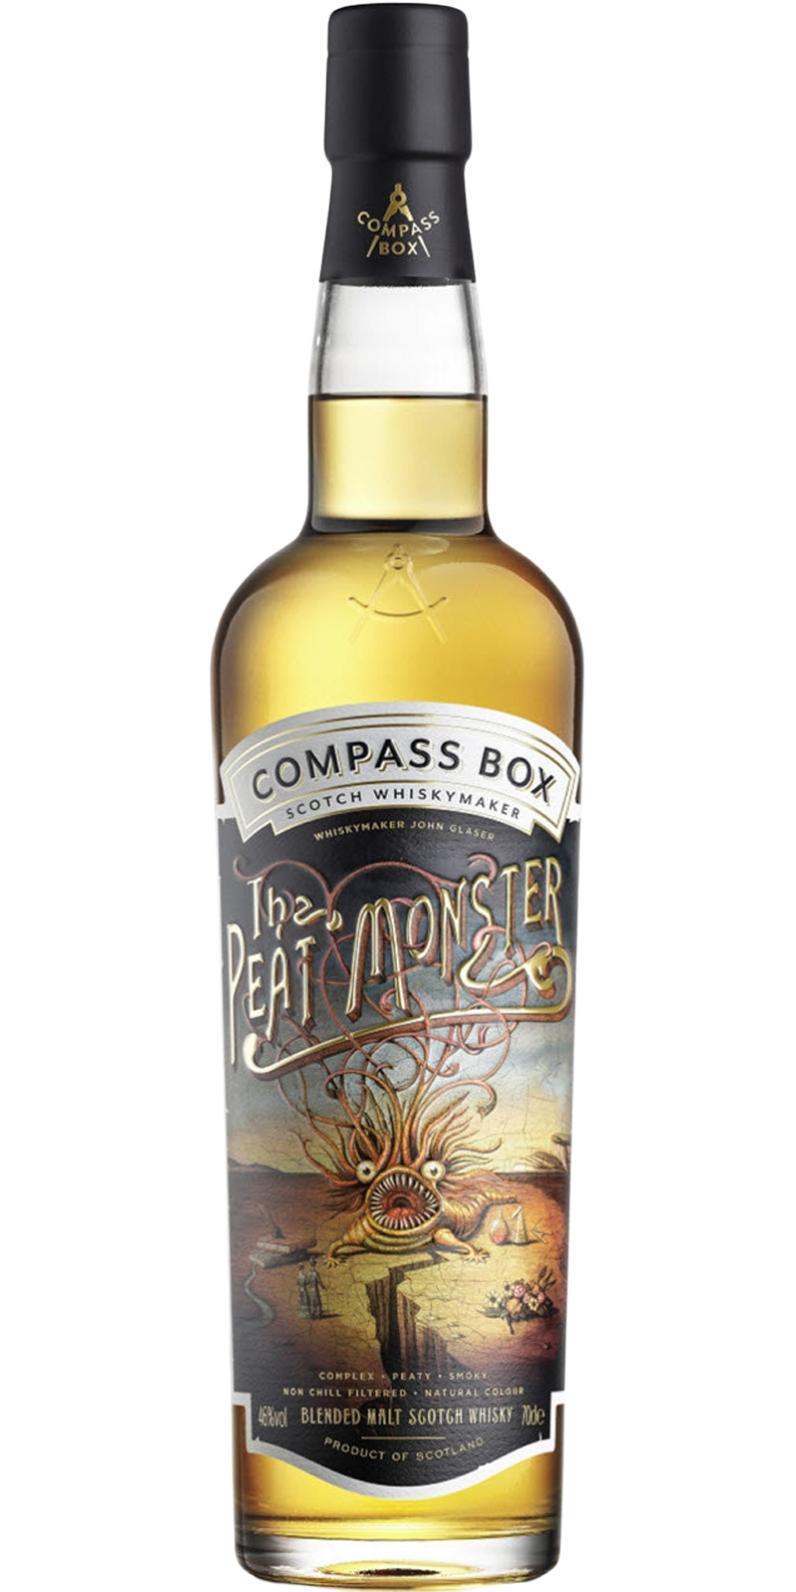 compass box the peat monster